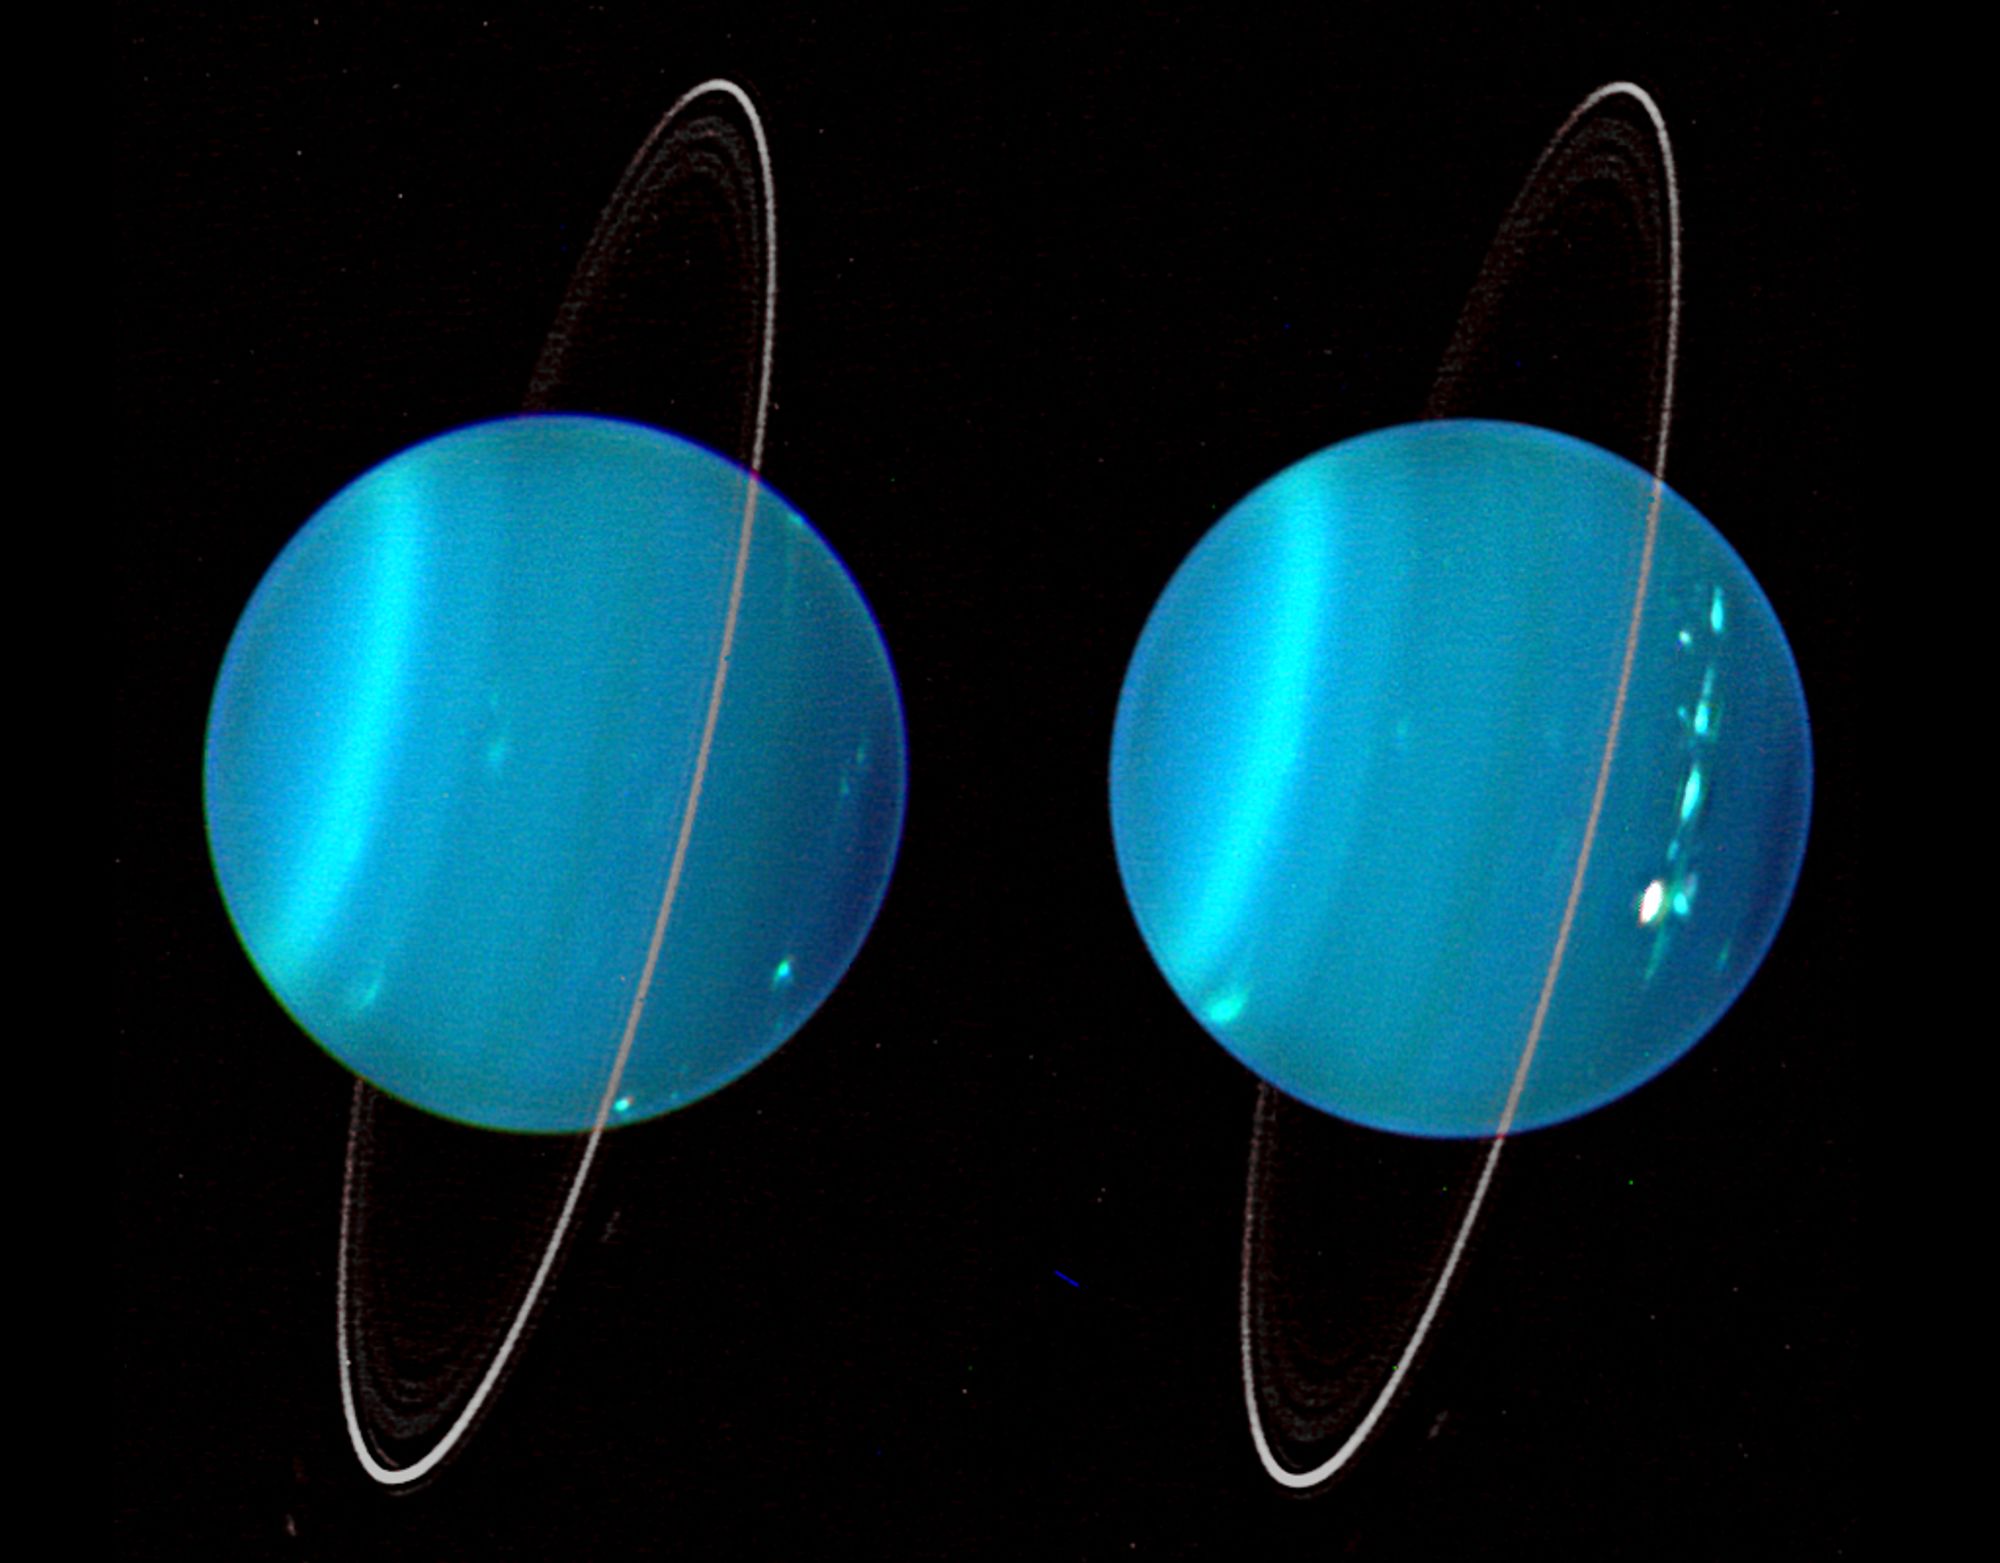 An image of Uranus's two hemispheres laid out side-by-side and brilliantly blue from infrared technology. 